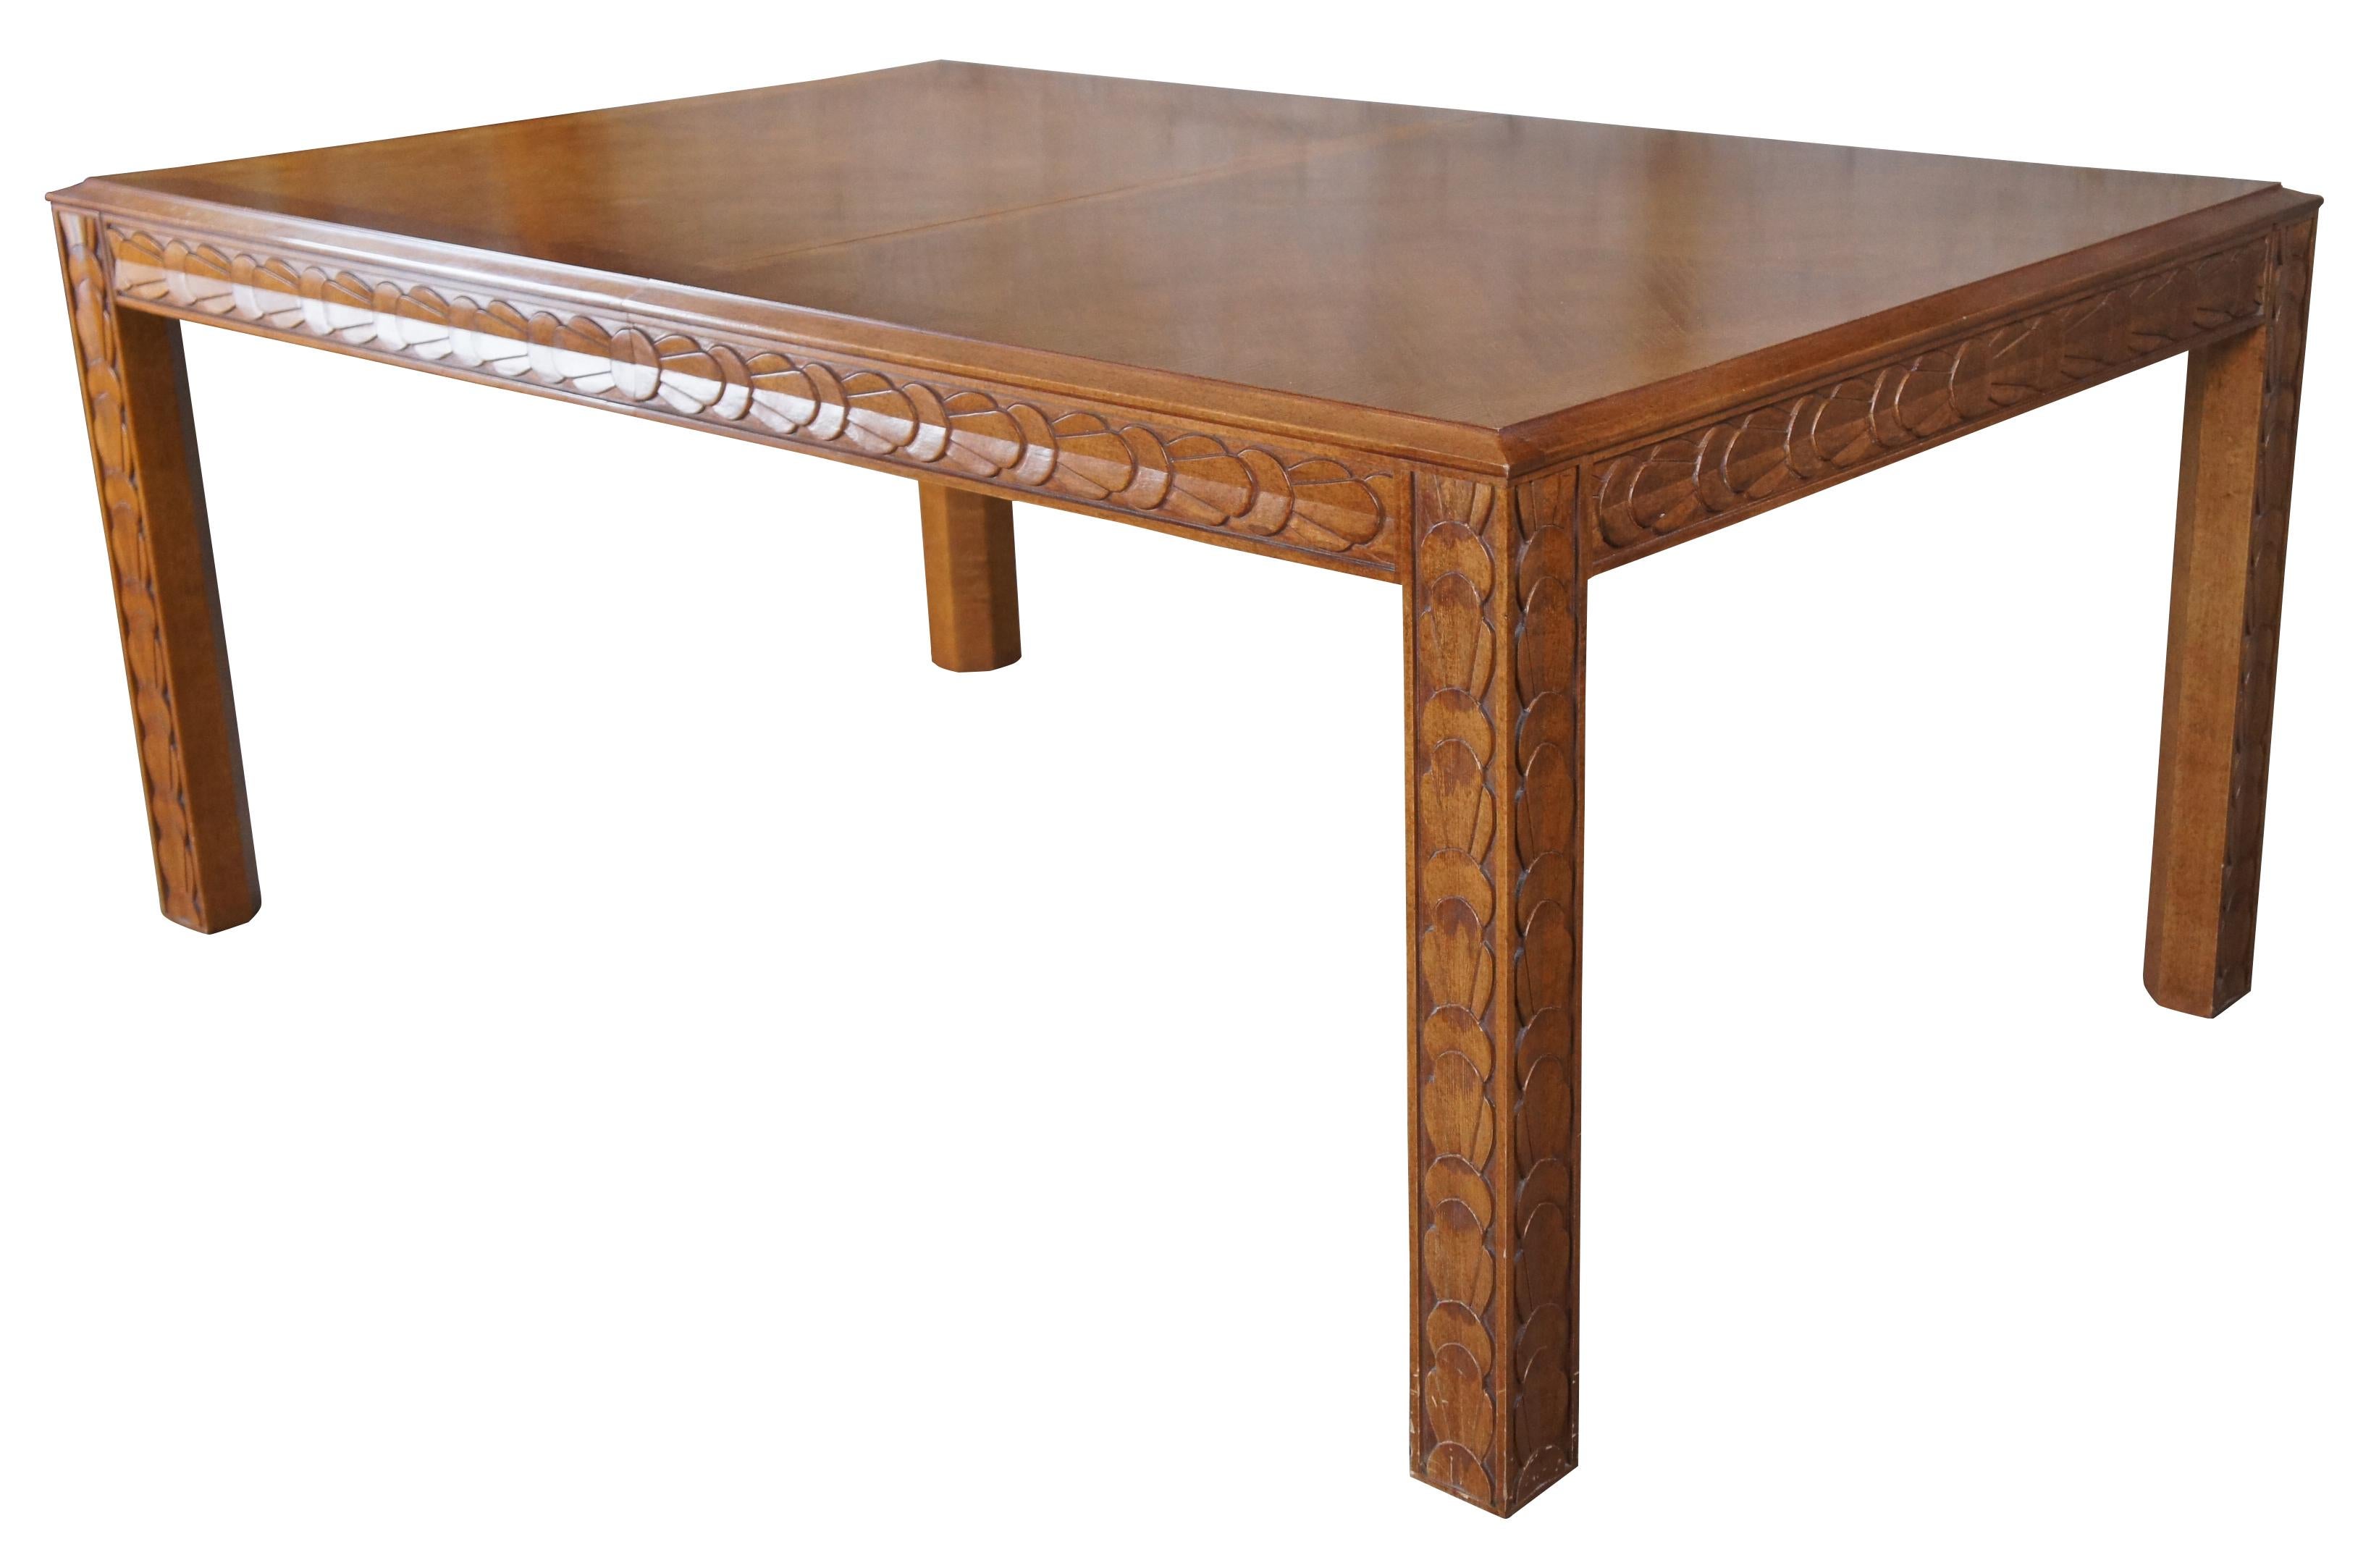 Vintage Century Furniture extendable dining table. Made of maple featuring Parsons style modernist rectangular form with low relief fretwork accents.

Measures: 44